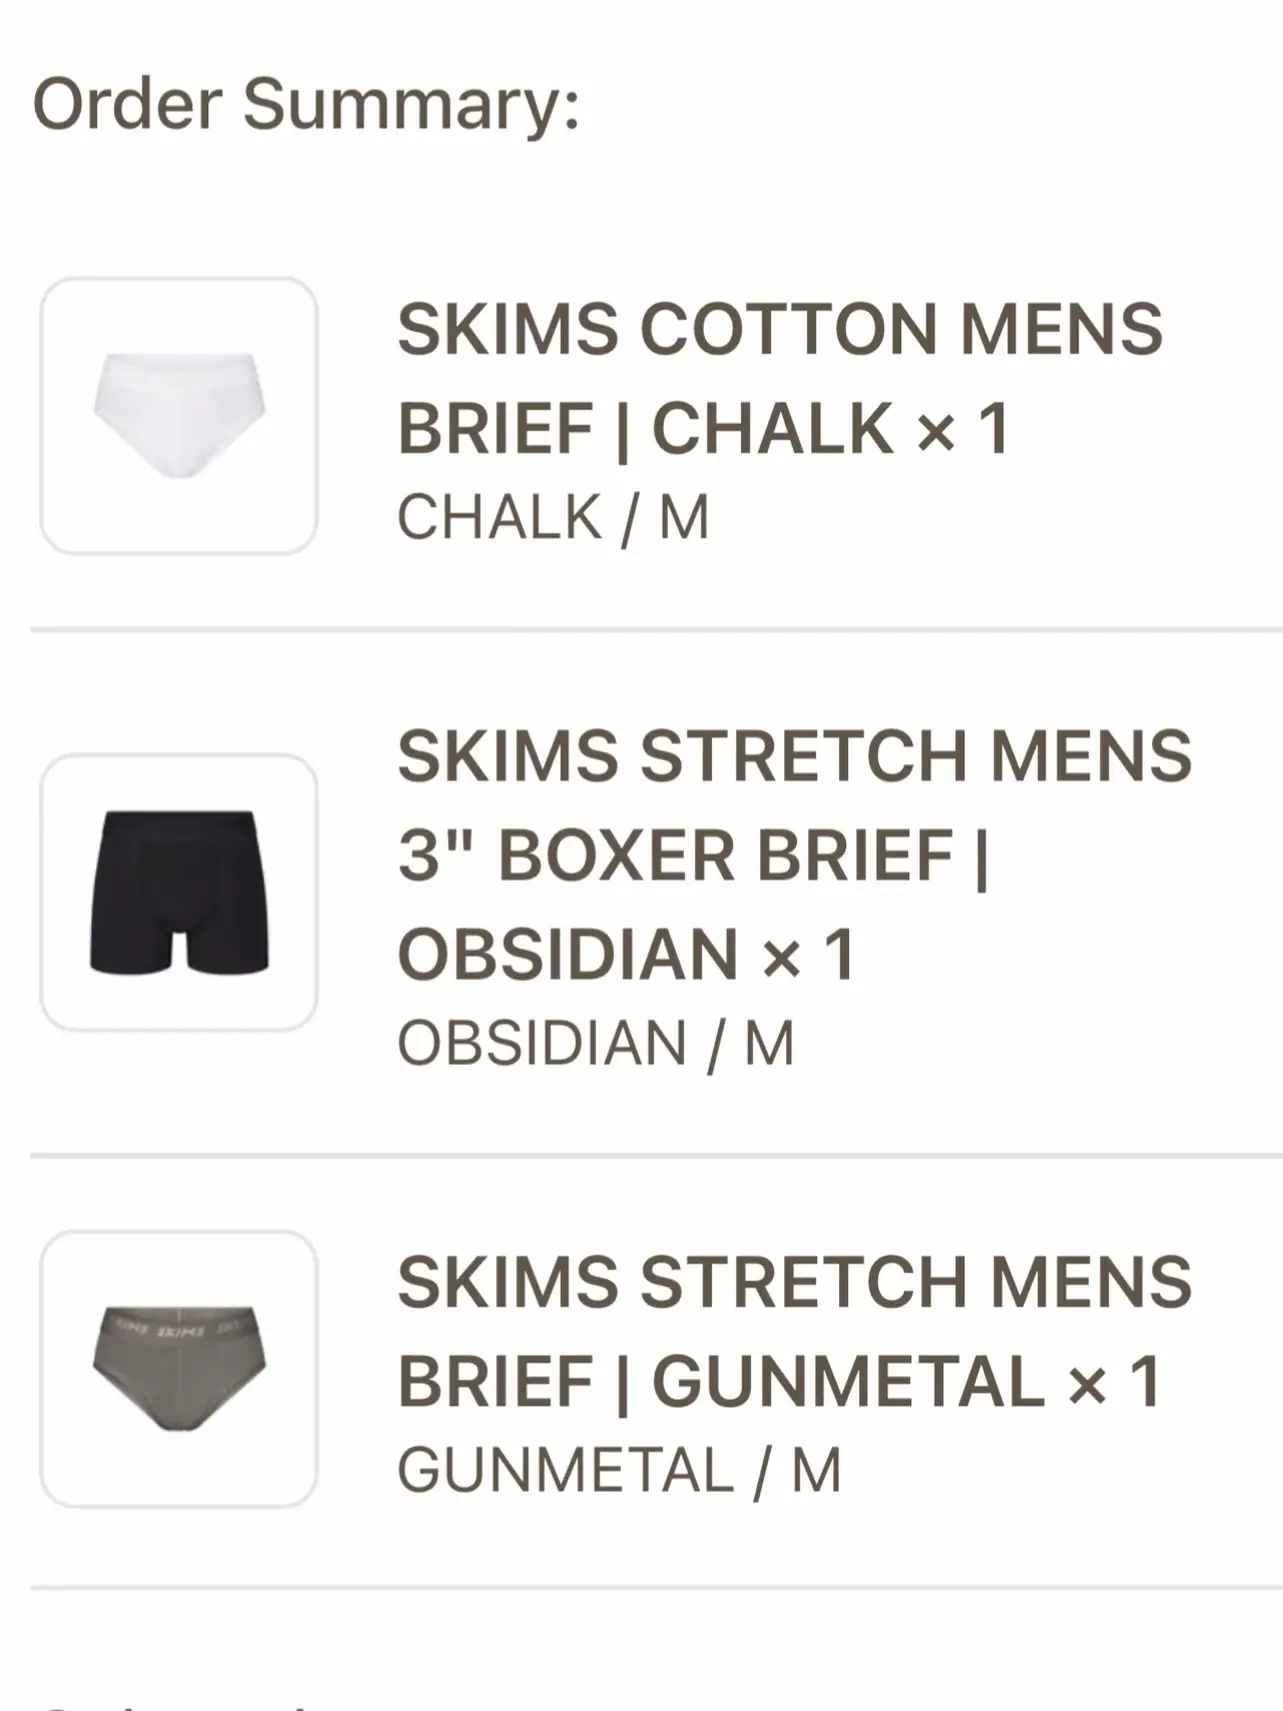 Skims Stretch Mens 3 Boxer Brief 3 Pack - Obsidian - 4X and 1